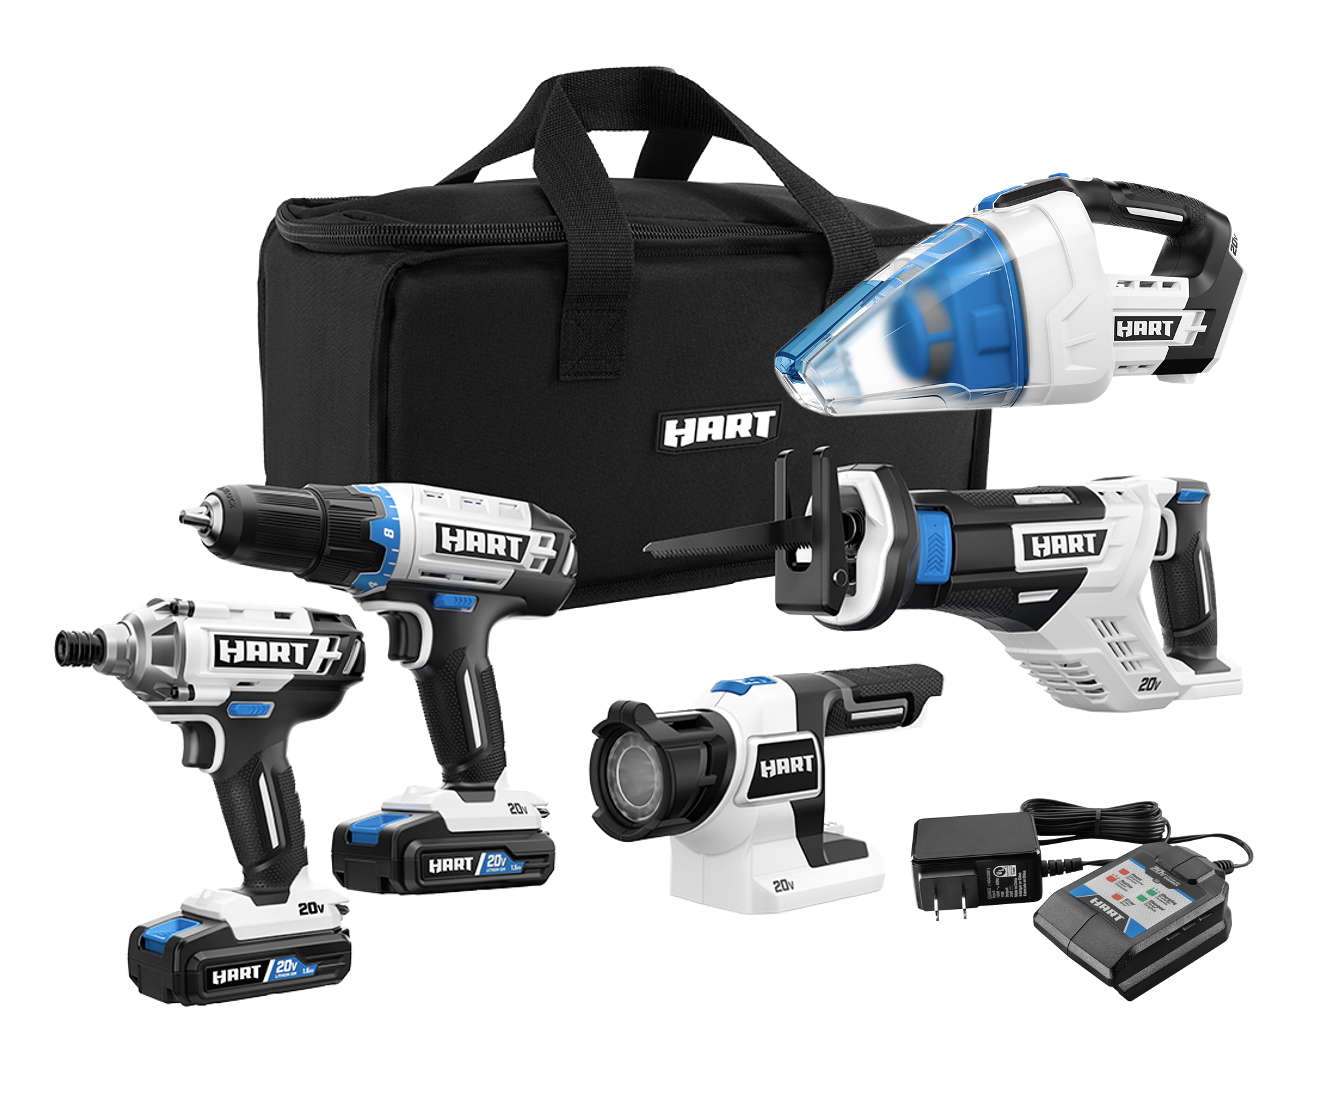 HART 20-Volt Cordless 5-Tool Combo Kit (2) 1.5Ah Lithium-Ion Batteries and 16-inch Storage Bag $79